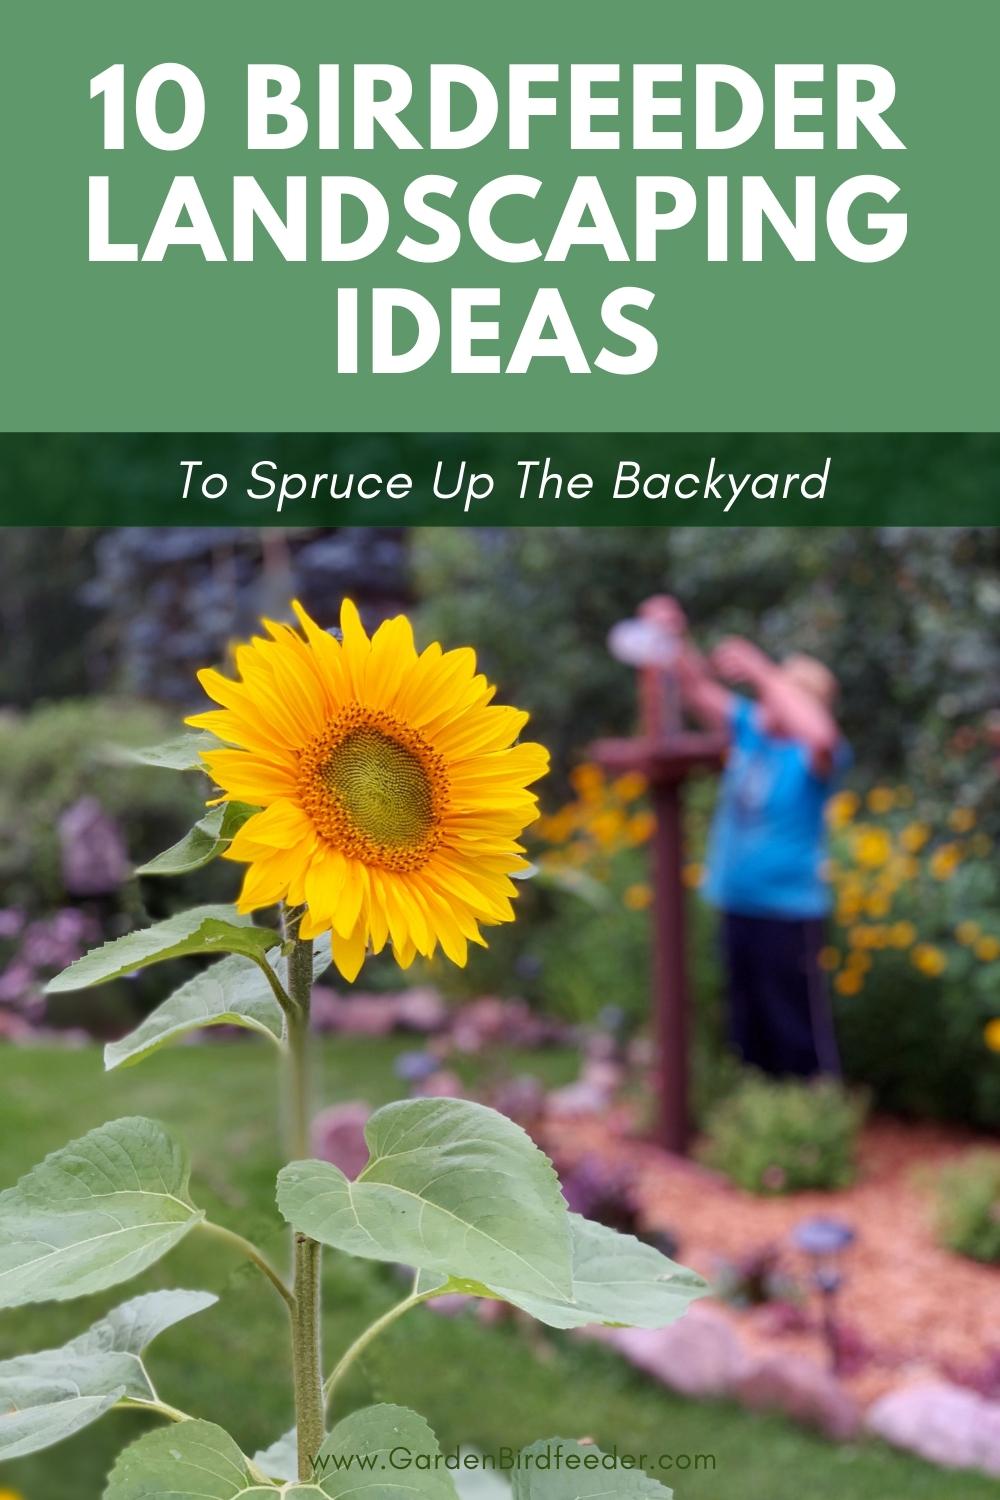 birdfeeder landscaping ideas - with sunflower and man filling the feeder in background